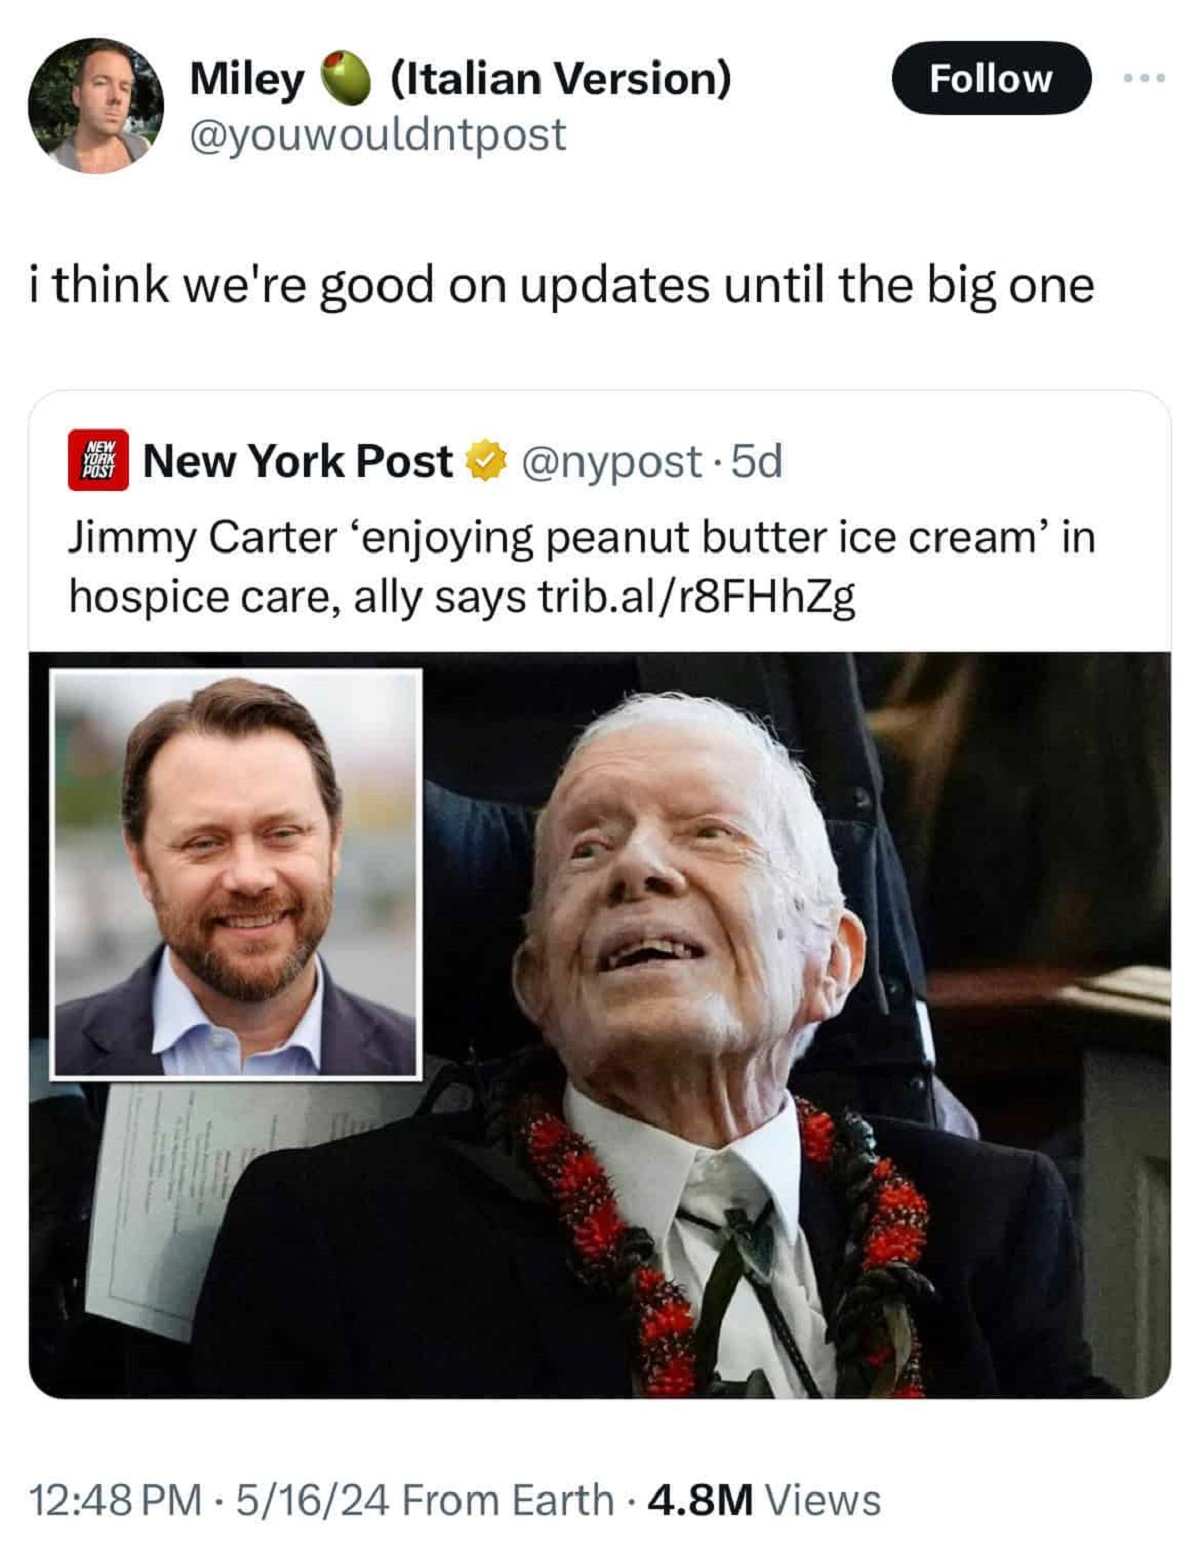 jimmy carter - Miley Italian Version 000 i think we're good on updates until the big one New York Post New York Post . 5d Jimmy Carter 'enjoying peanut butter ice cream' in hospice care, ally says trib.alr8FHhZg 51624 From Earth 4.8M Views .